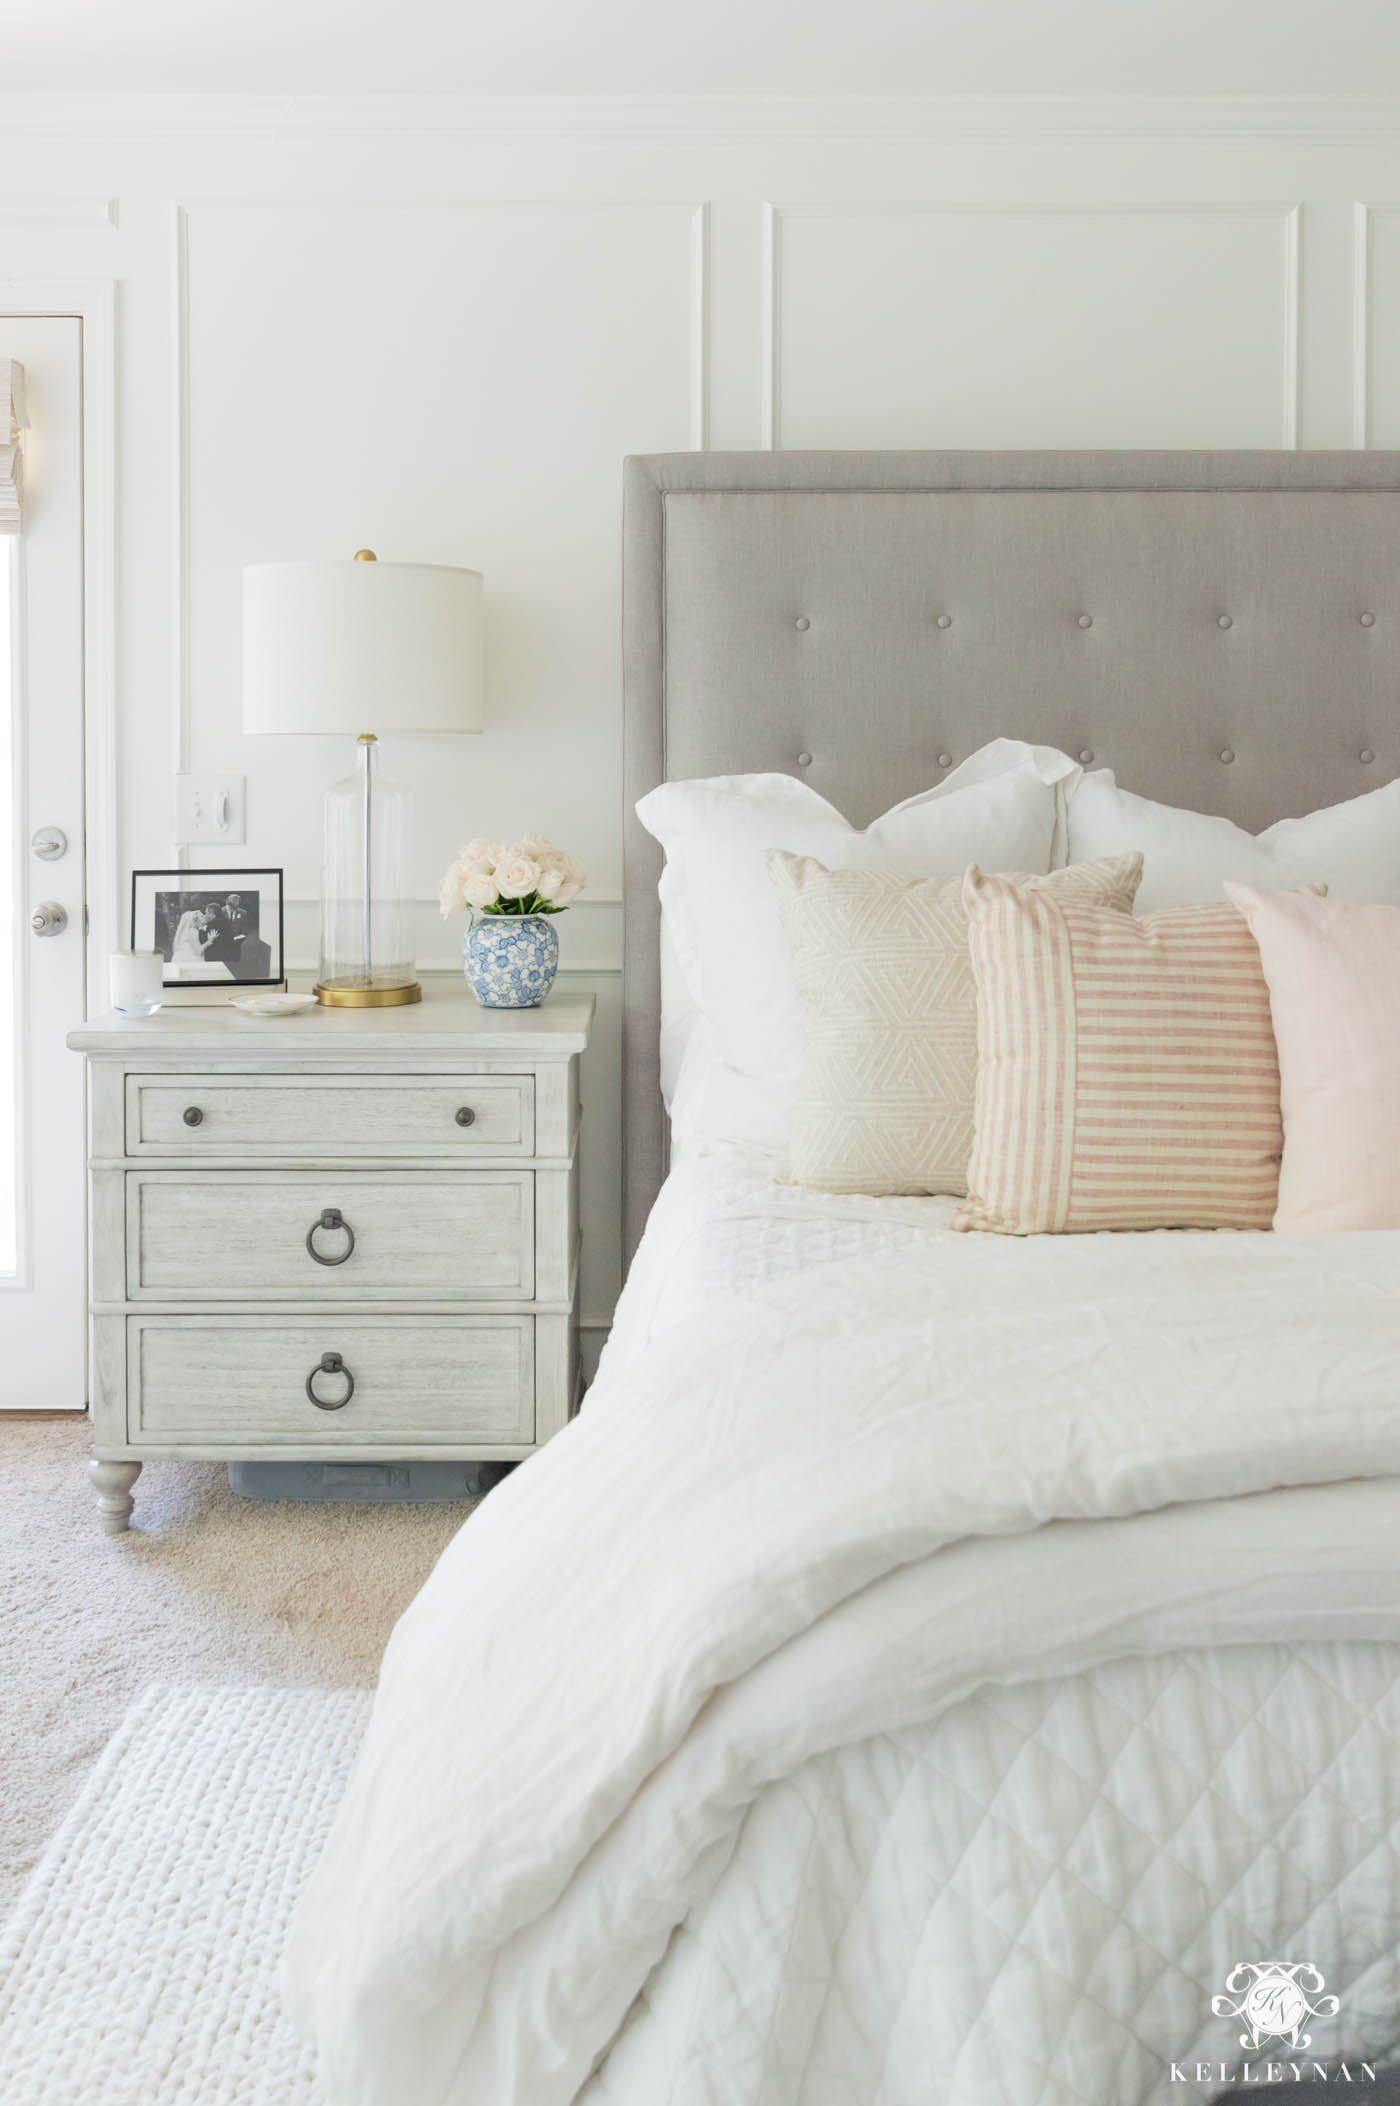 Favorite bedside tables and bachelor's chest nightstands